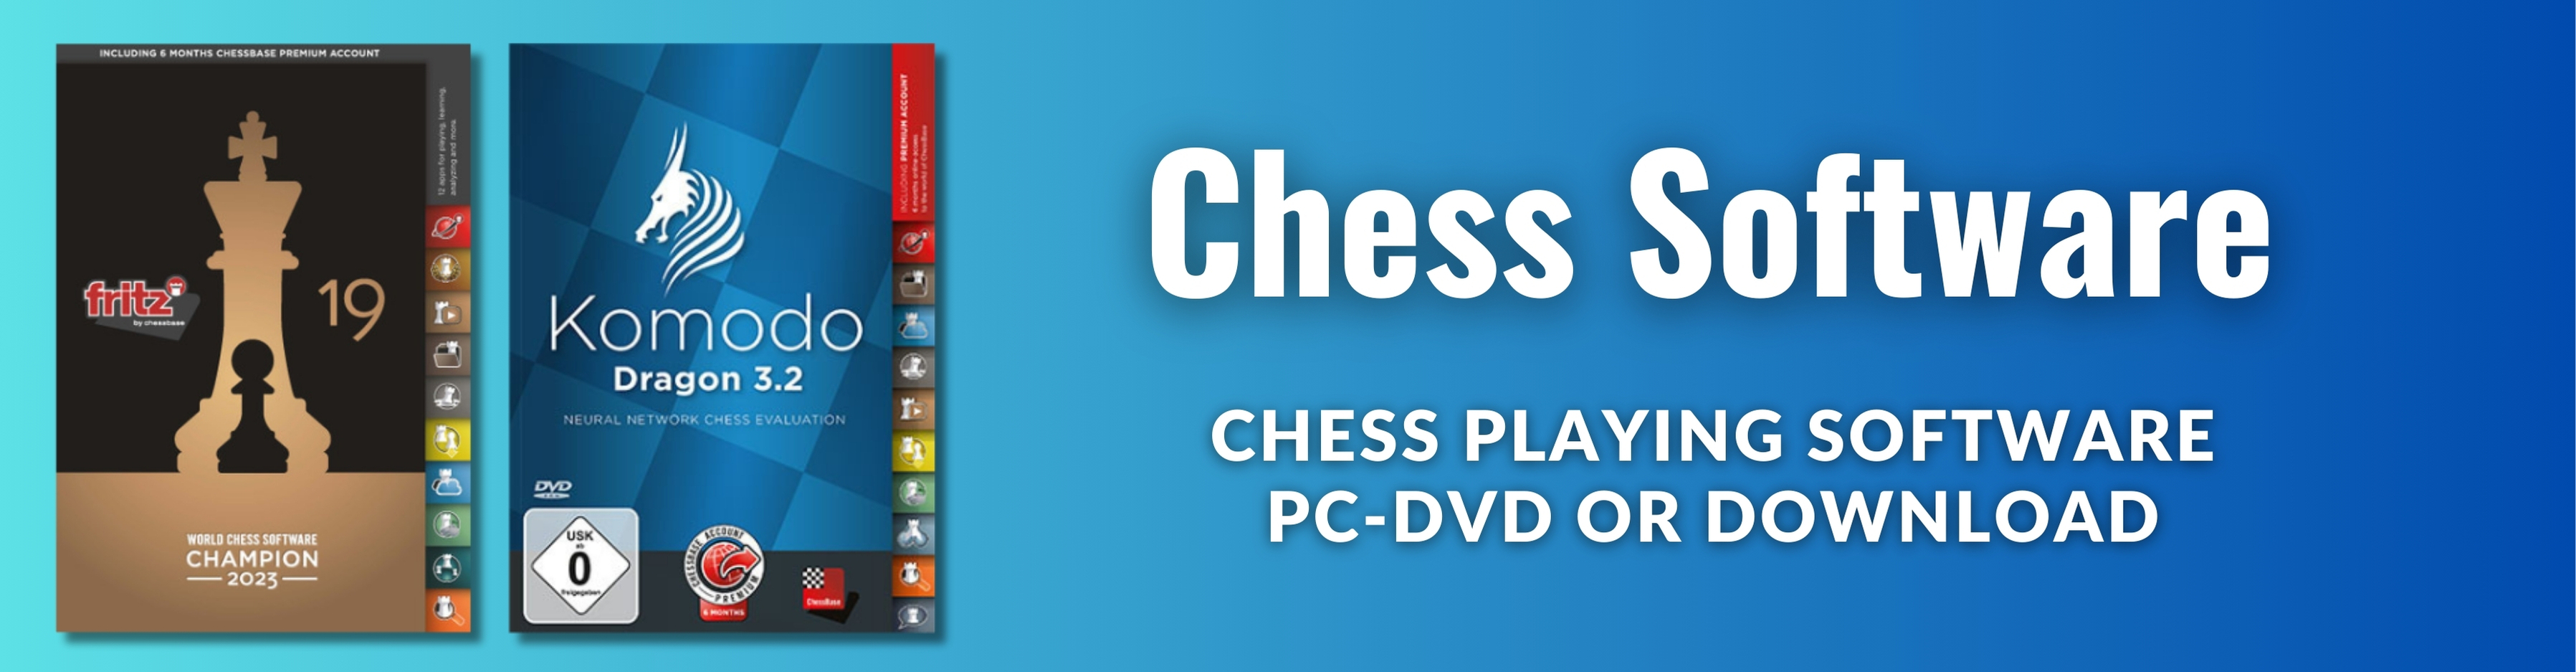 Electronic Chess, Chess Software, Chess Sets, Chess Download, Chess Videos and More! Free Shipping in USA | ChessCentral